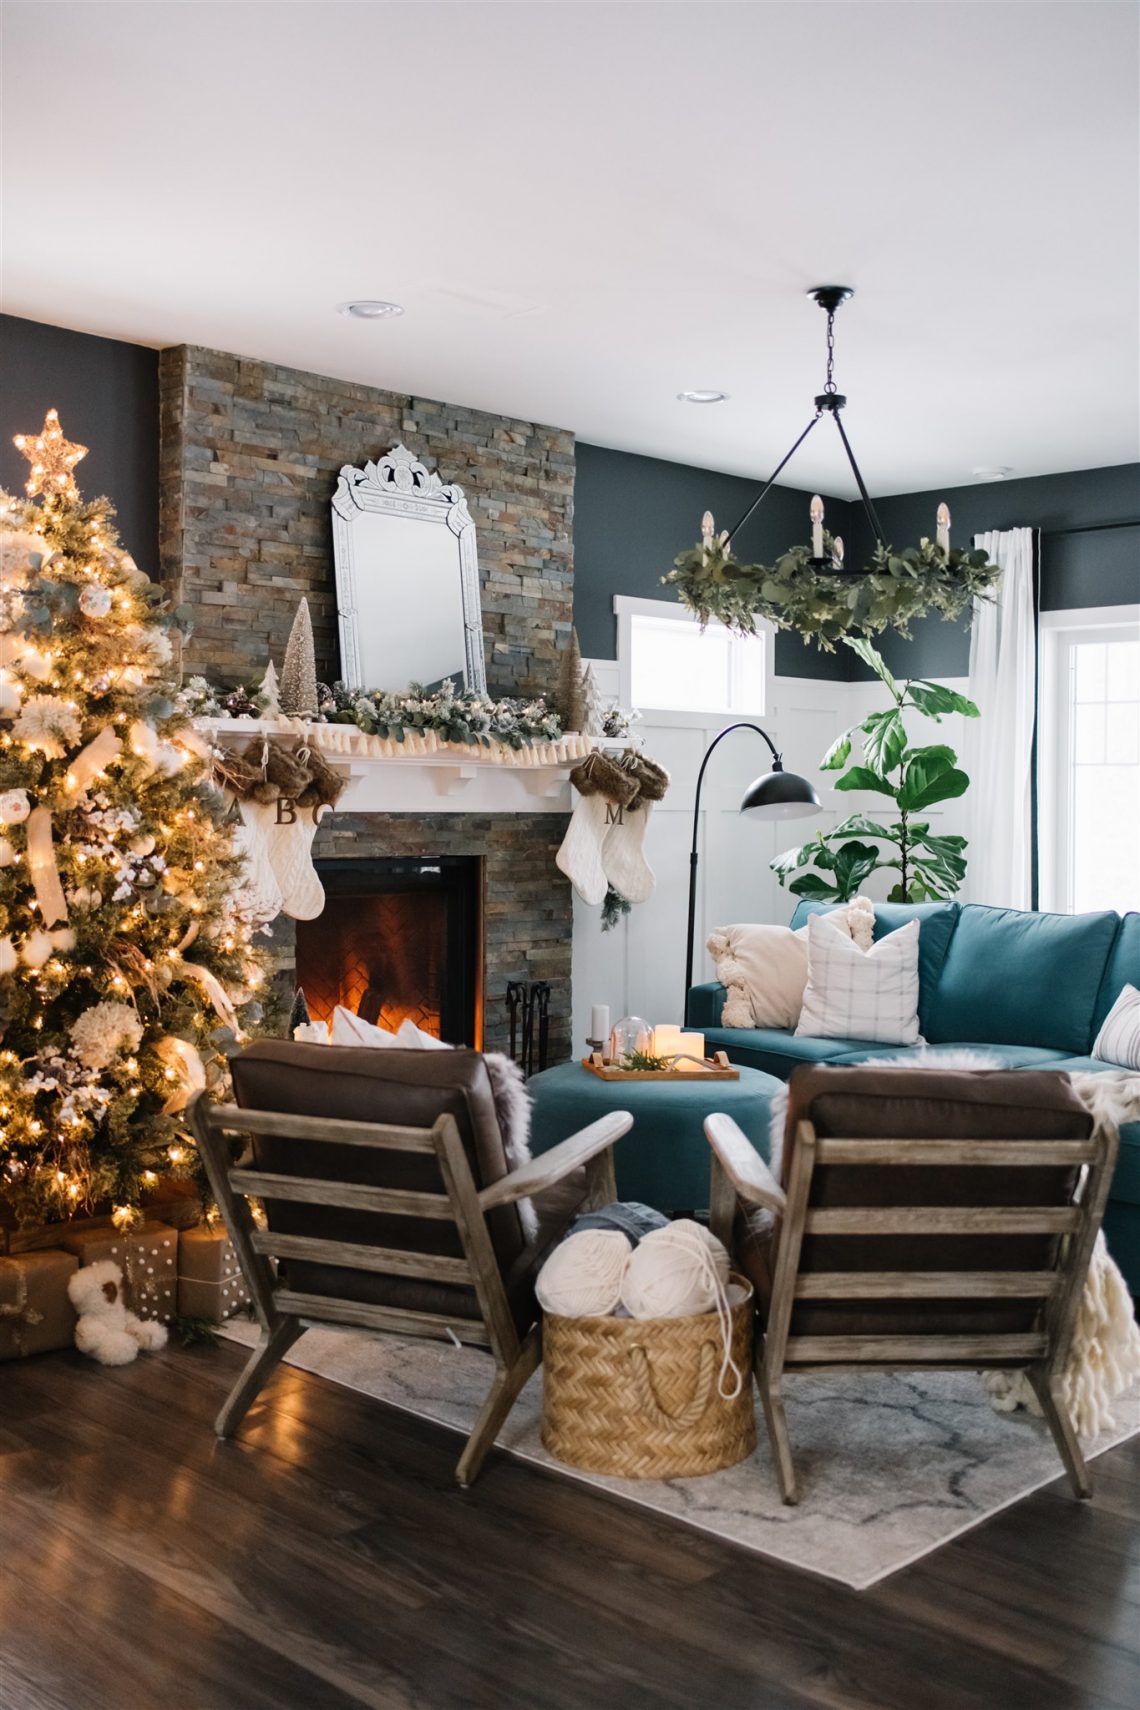 10 Ways to Create a Cozy Christmas Home - ideas for hygge during the Holidays